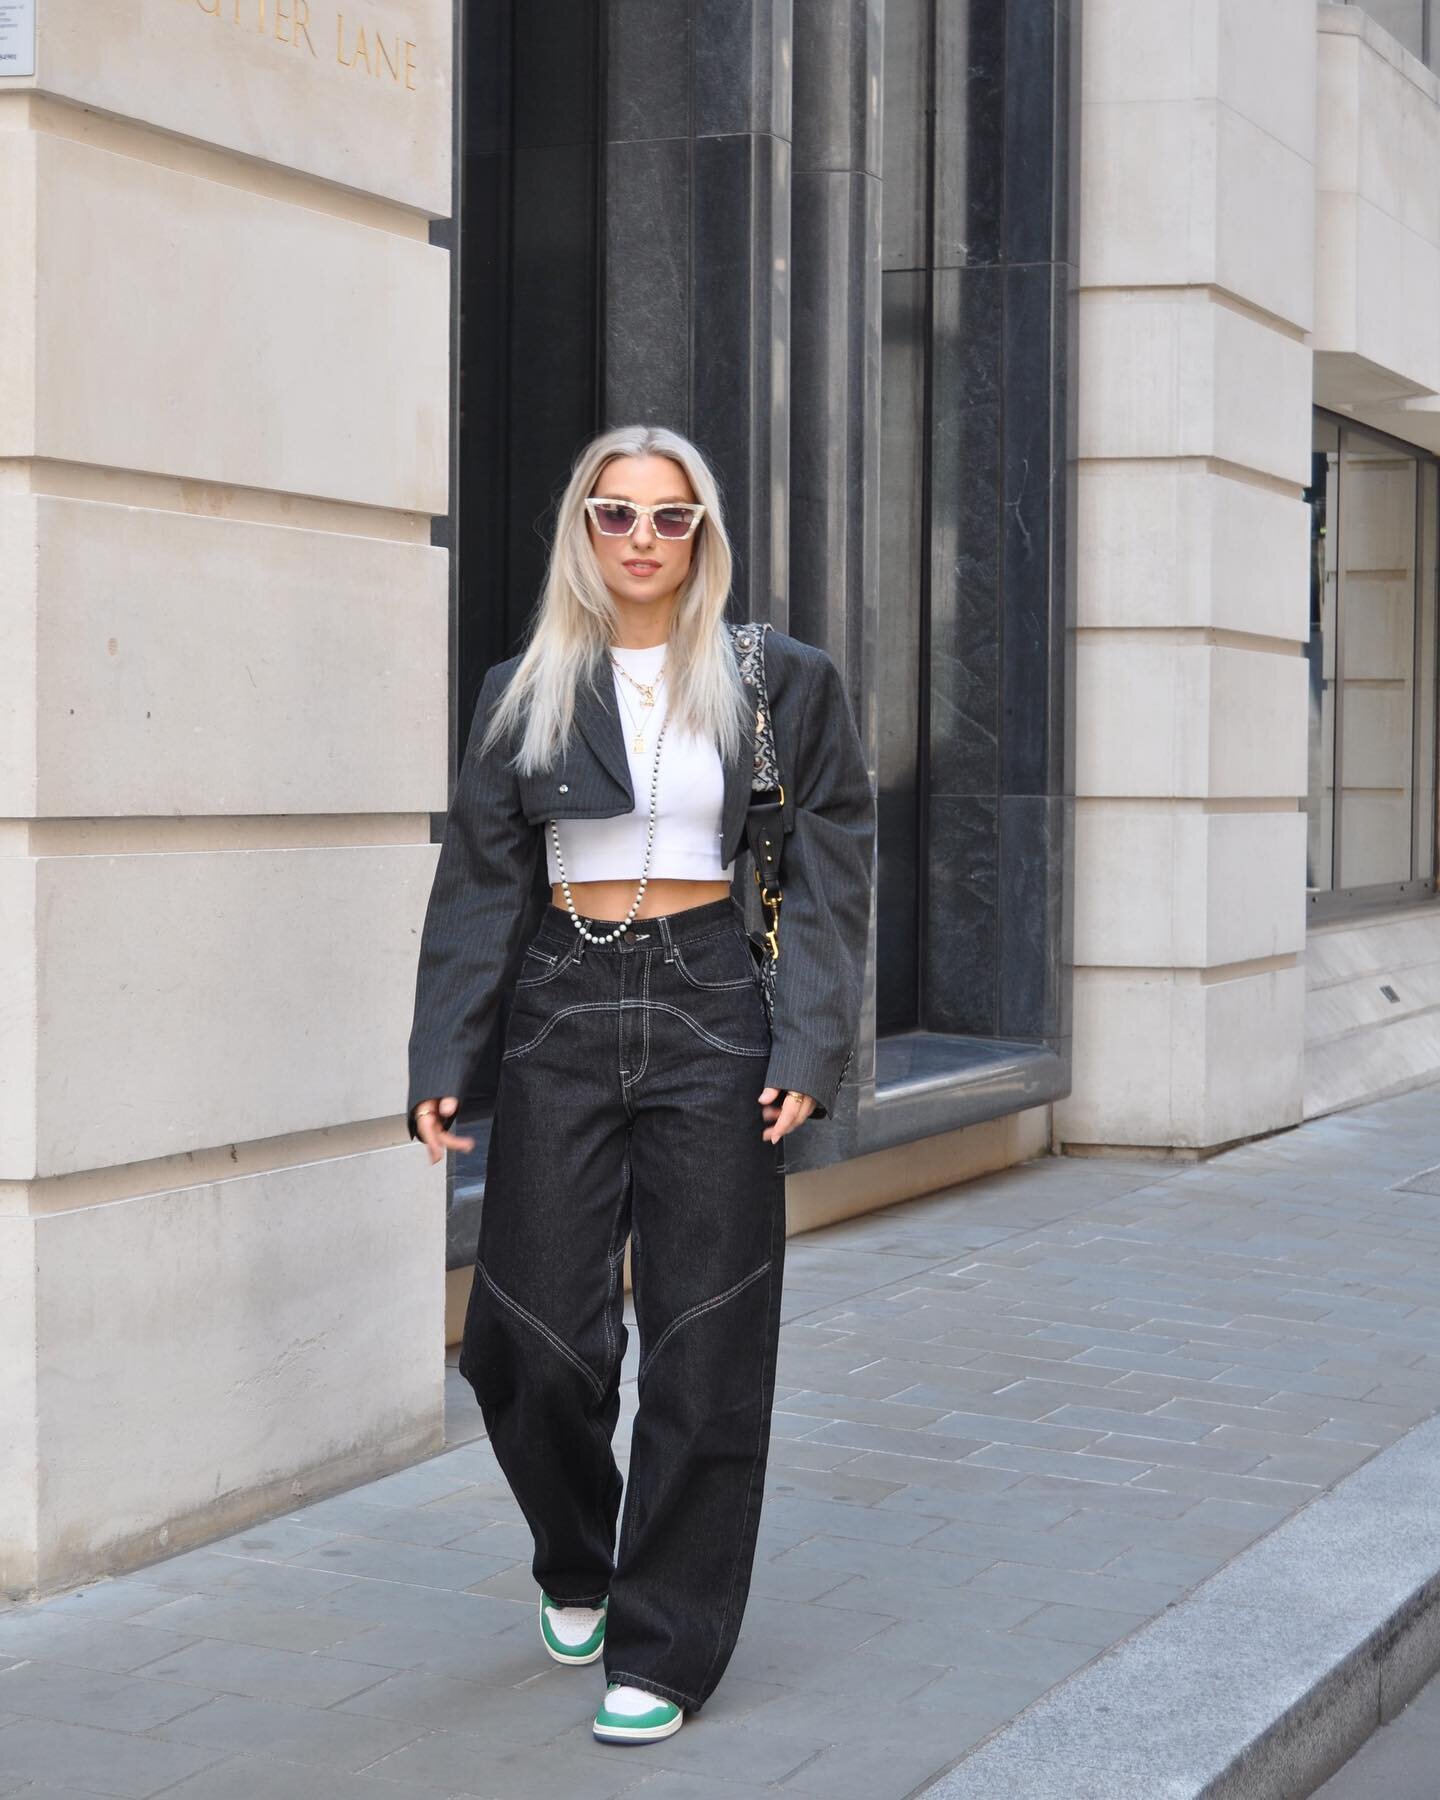 Throwing shade🕶🚨 

Outfit Details
Cropped blazer: thrifted/diy
Tank: @zara
Jeans: @hm 
Sunglasses: @andotherstories 
Bag: @dior @vestiaireco 
.
.
.
.
.
#londonstyle #londonstreetstyle #londonoutfit #widelegjeans #widelegtrousers #flaredjeans #strai